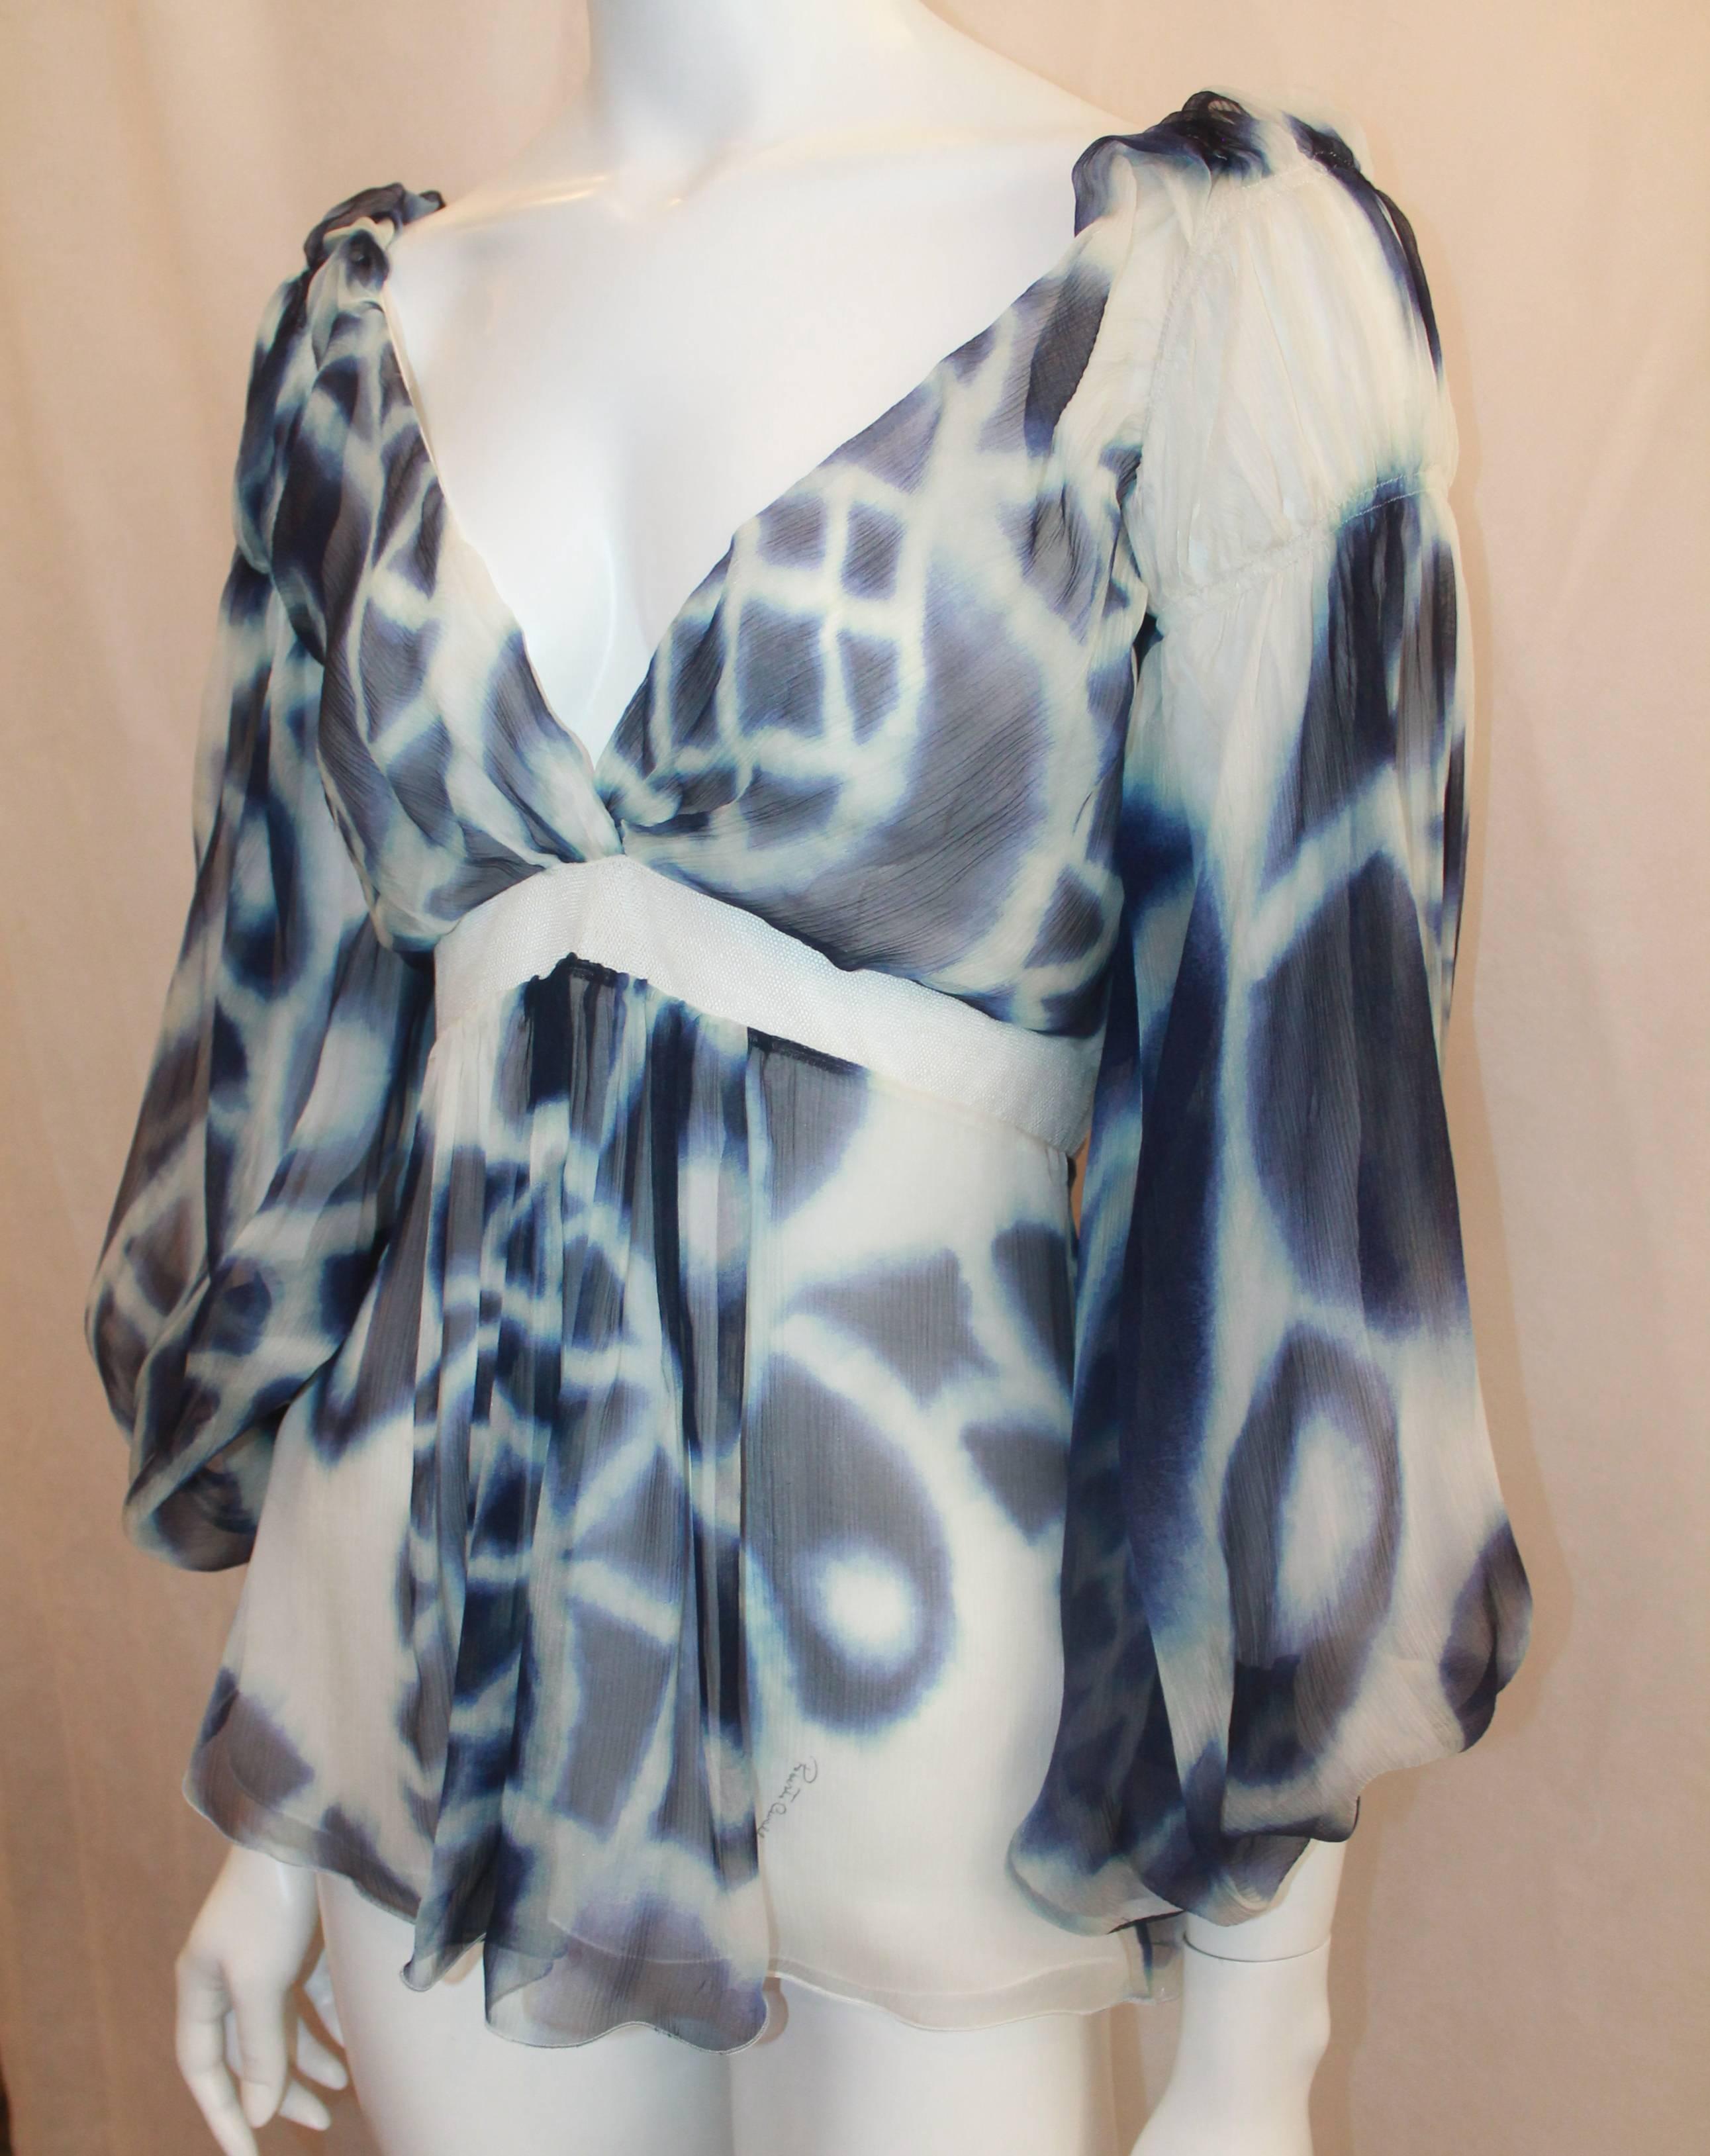  Roberto Cavalli Blue & White Printed Silk Chiffon Blouse - 38. This flowing blouse is in excellent condition and has a watercolor-like print. This top features a plunging neckline, puffy sleeves, and a mesh waist section.

Measurements:
Bust- Up